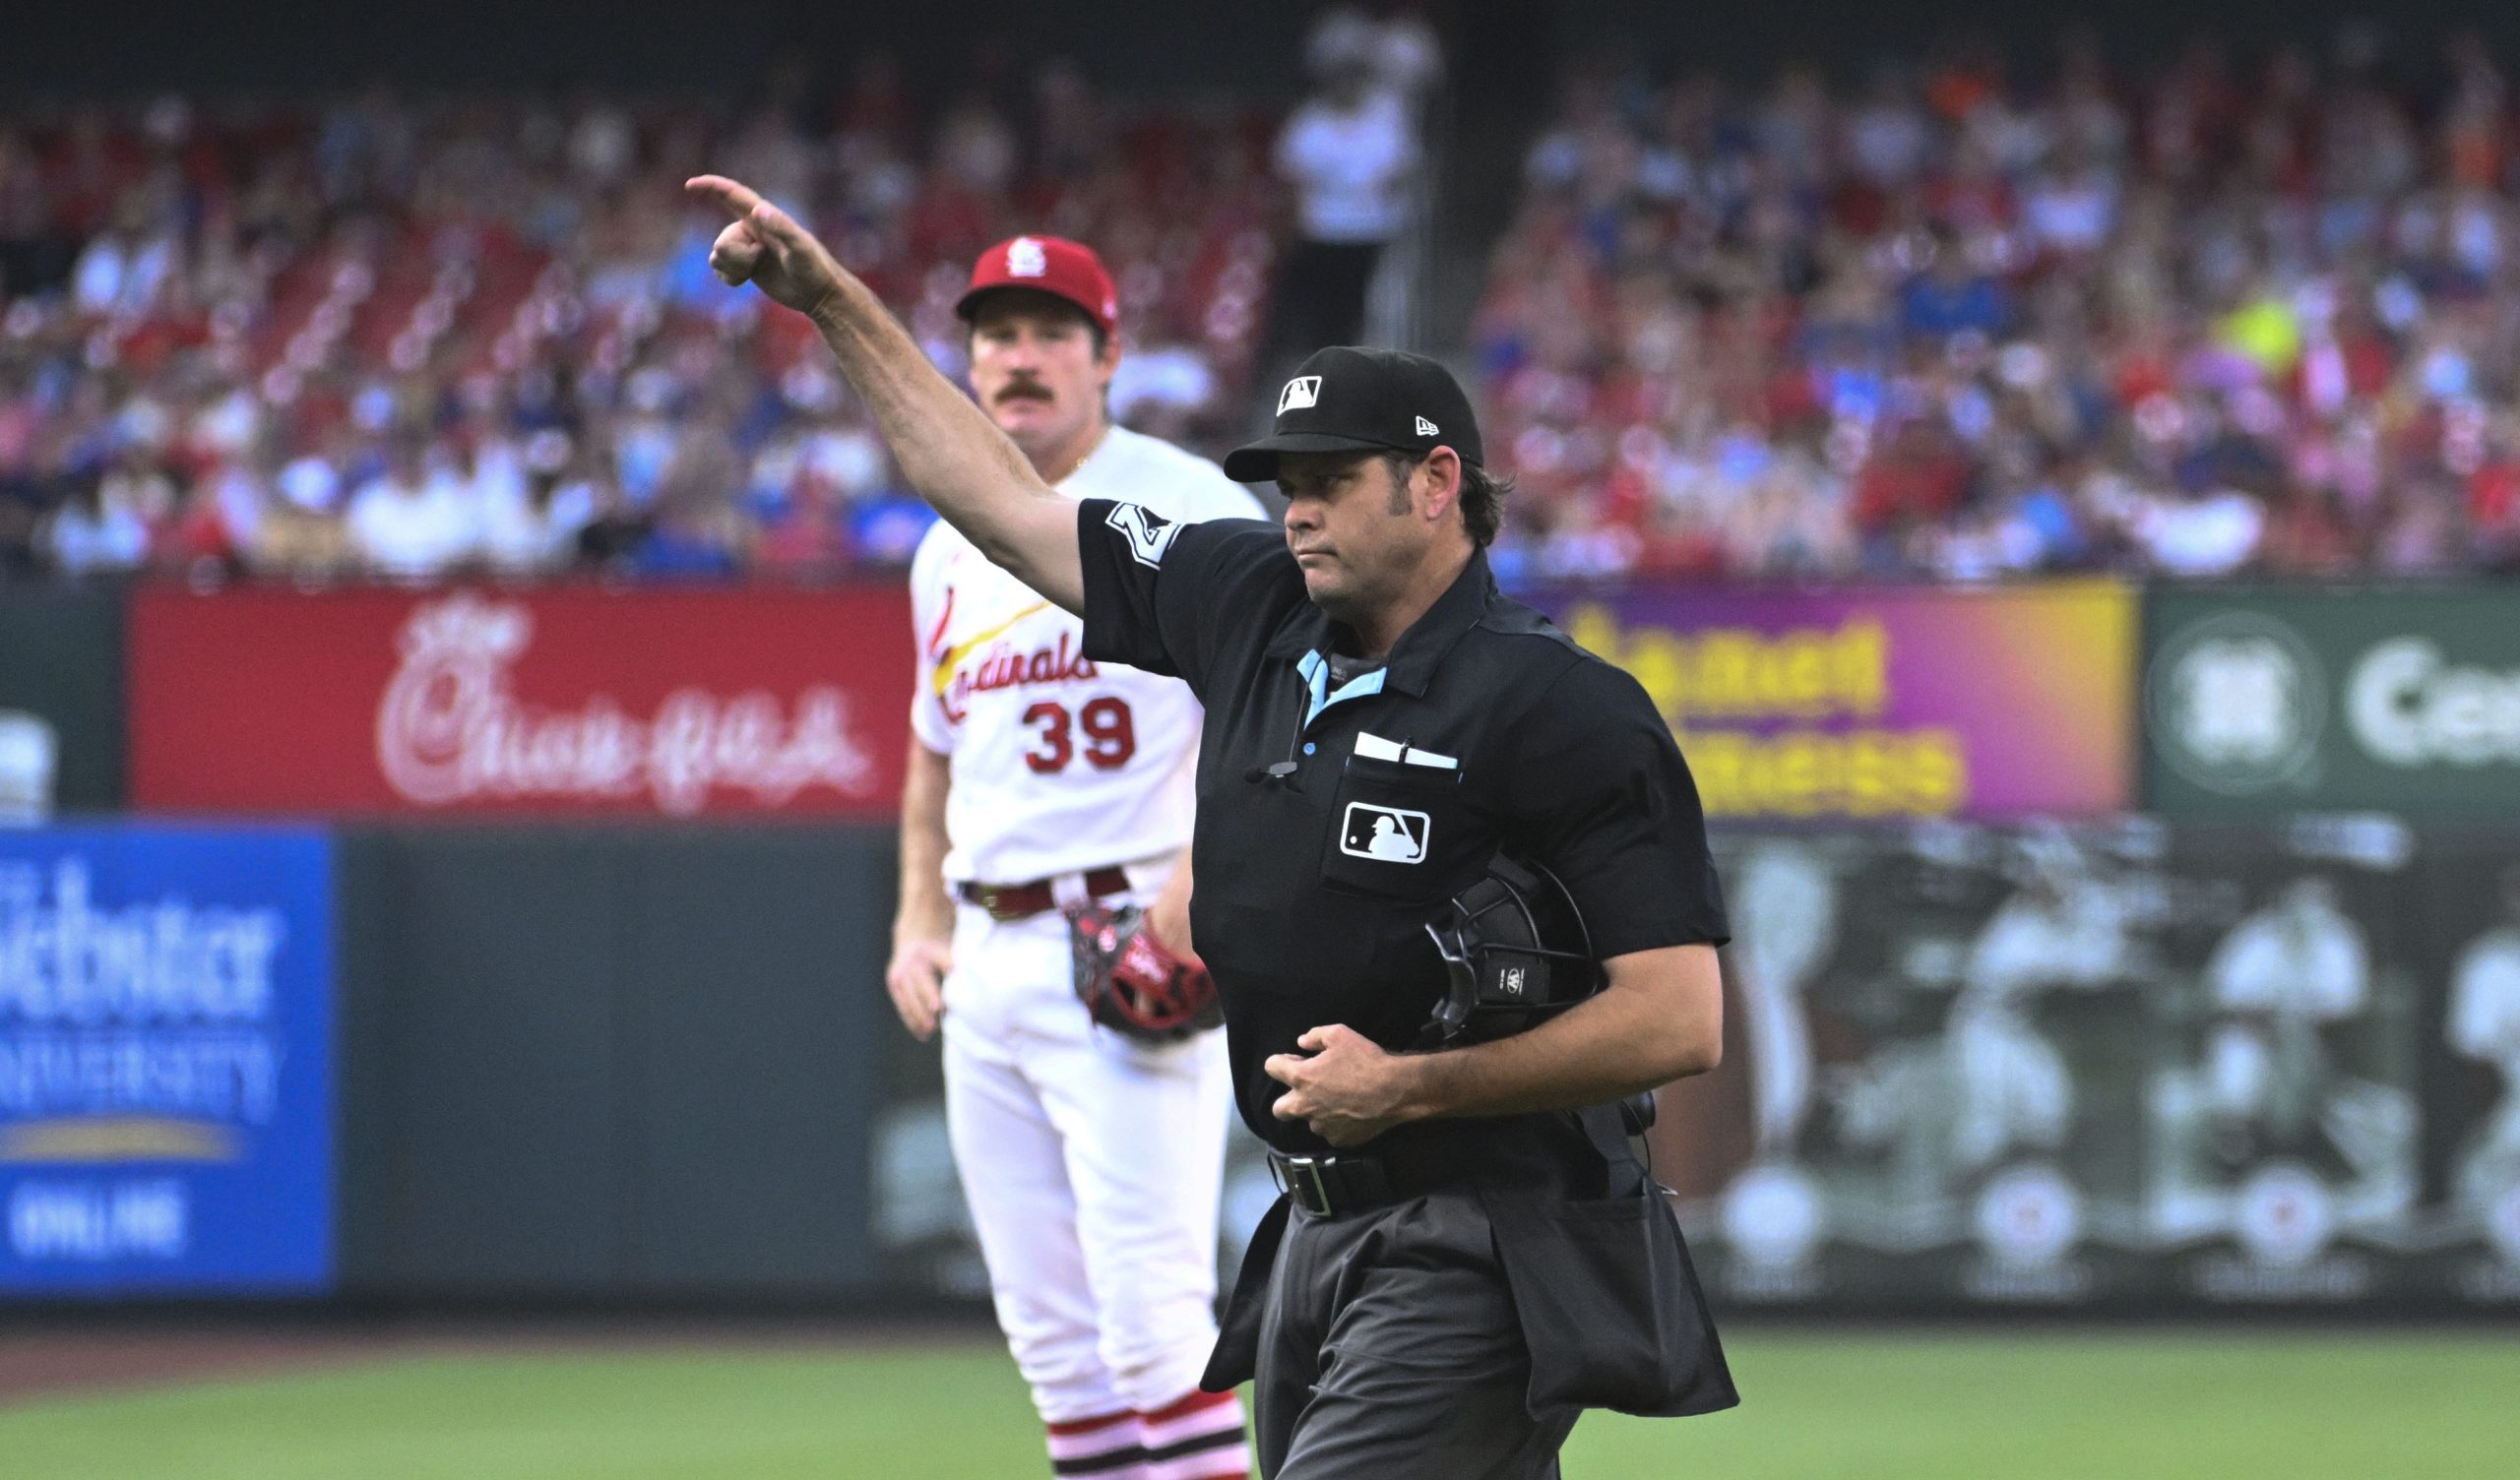 Three hitters into the Cubs-Cardinals series, there was an ejection, which Cardinals color commentator Brad Thompson couldn't believe. Photo Credit: Joe Puetz-USA TODAY Sports